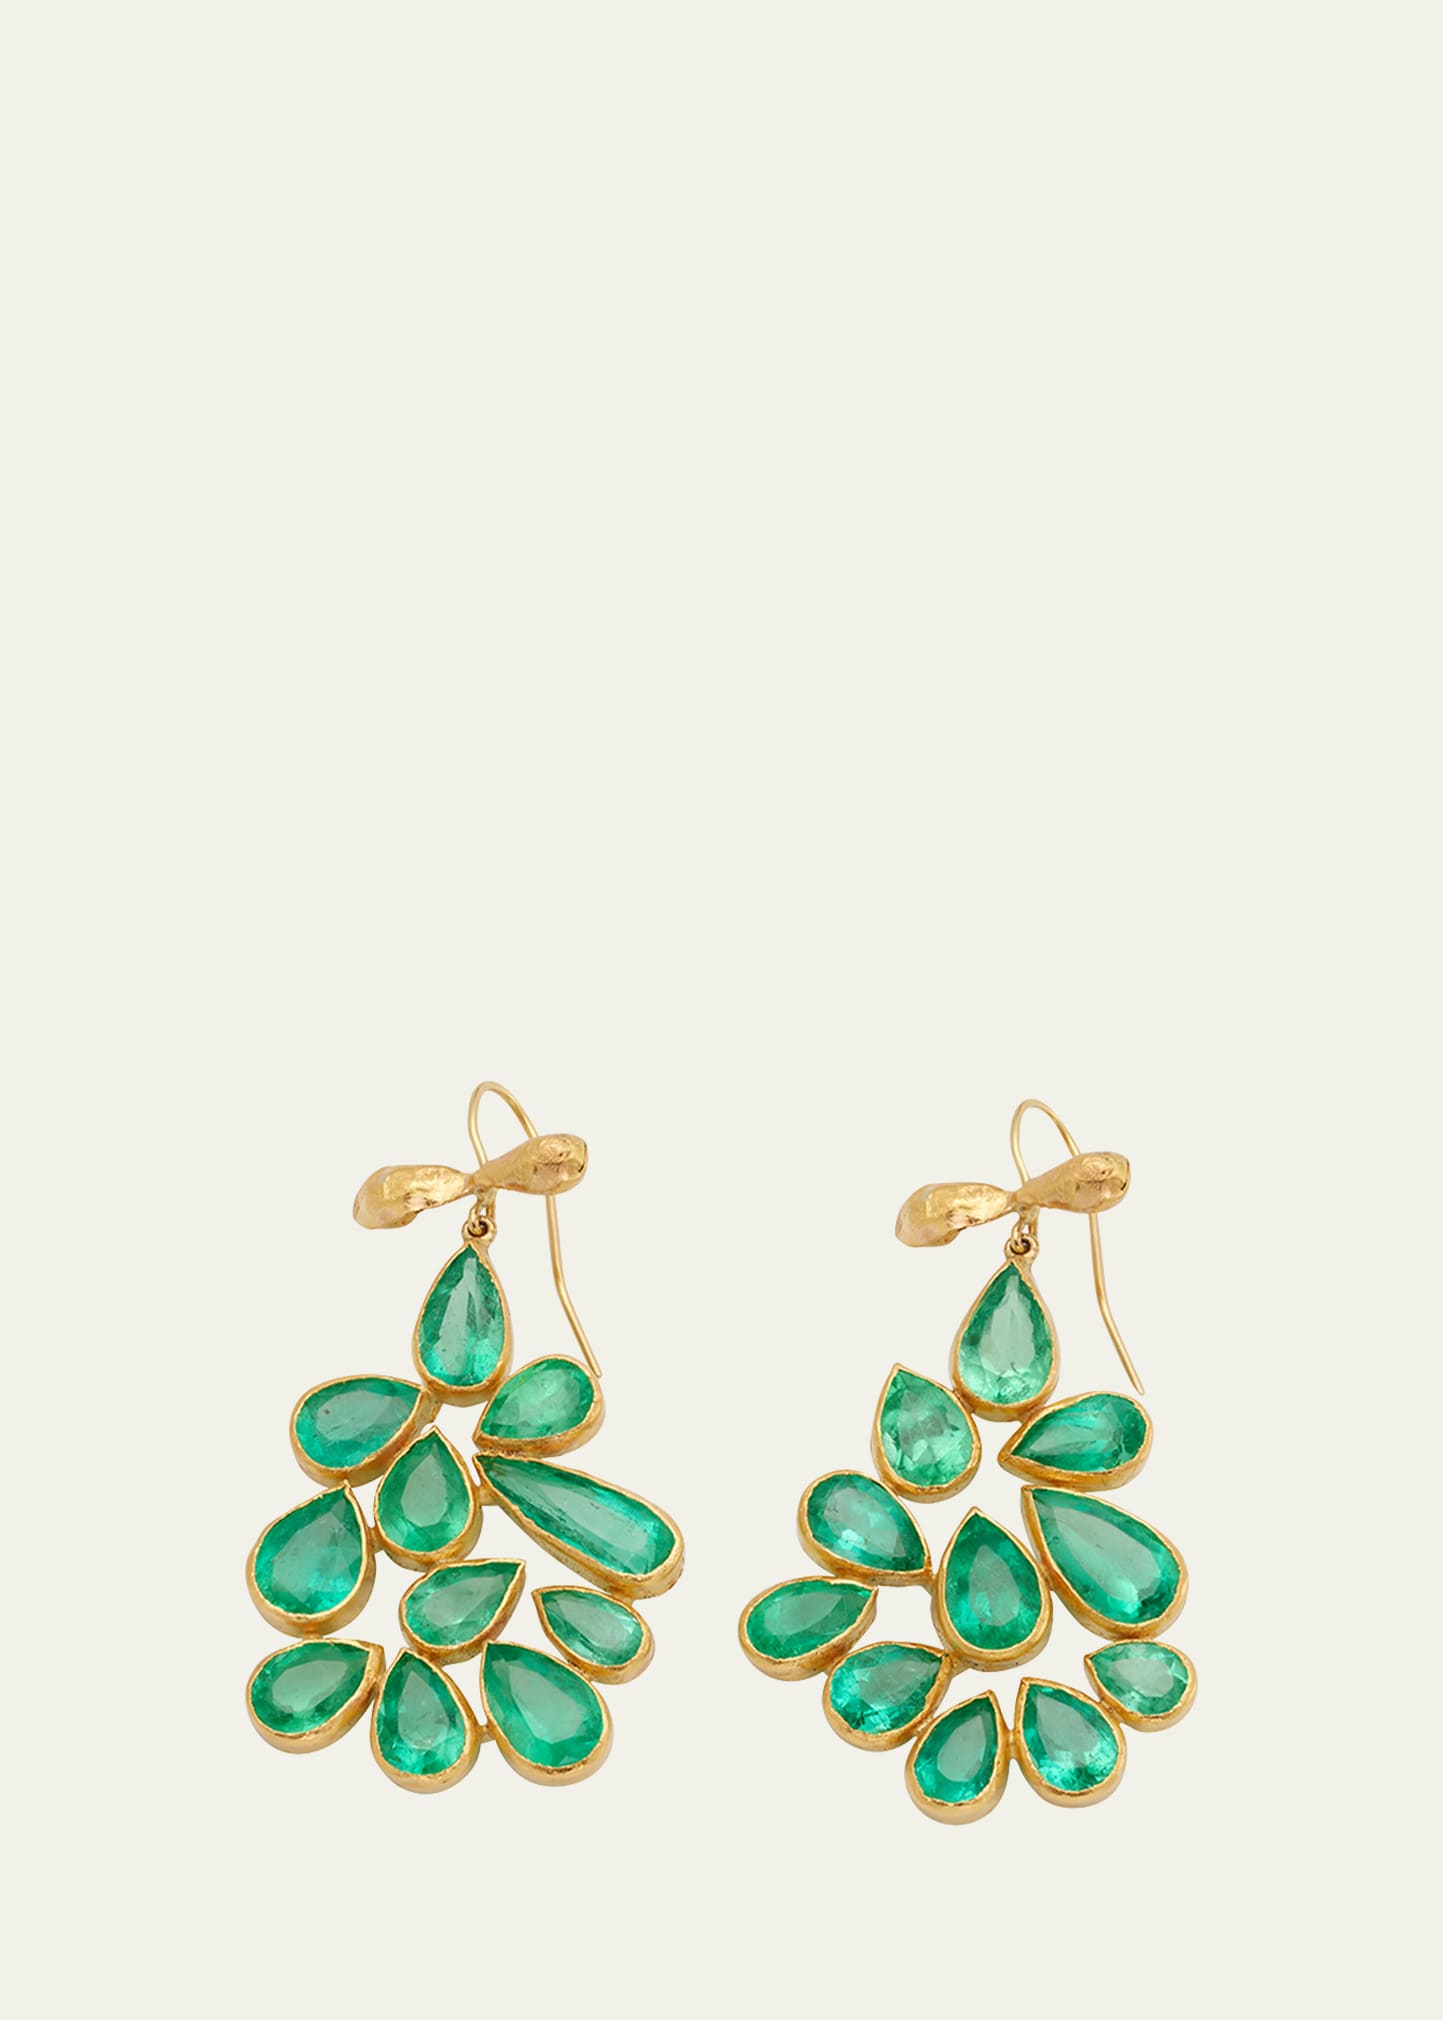 JUDY GEIB Colombian Emerald Pear-Shaped 18K and 22K Gold Earrings